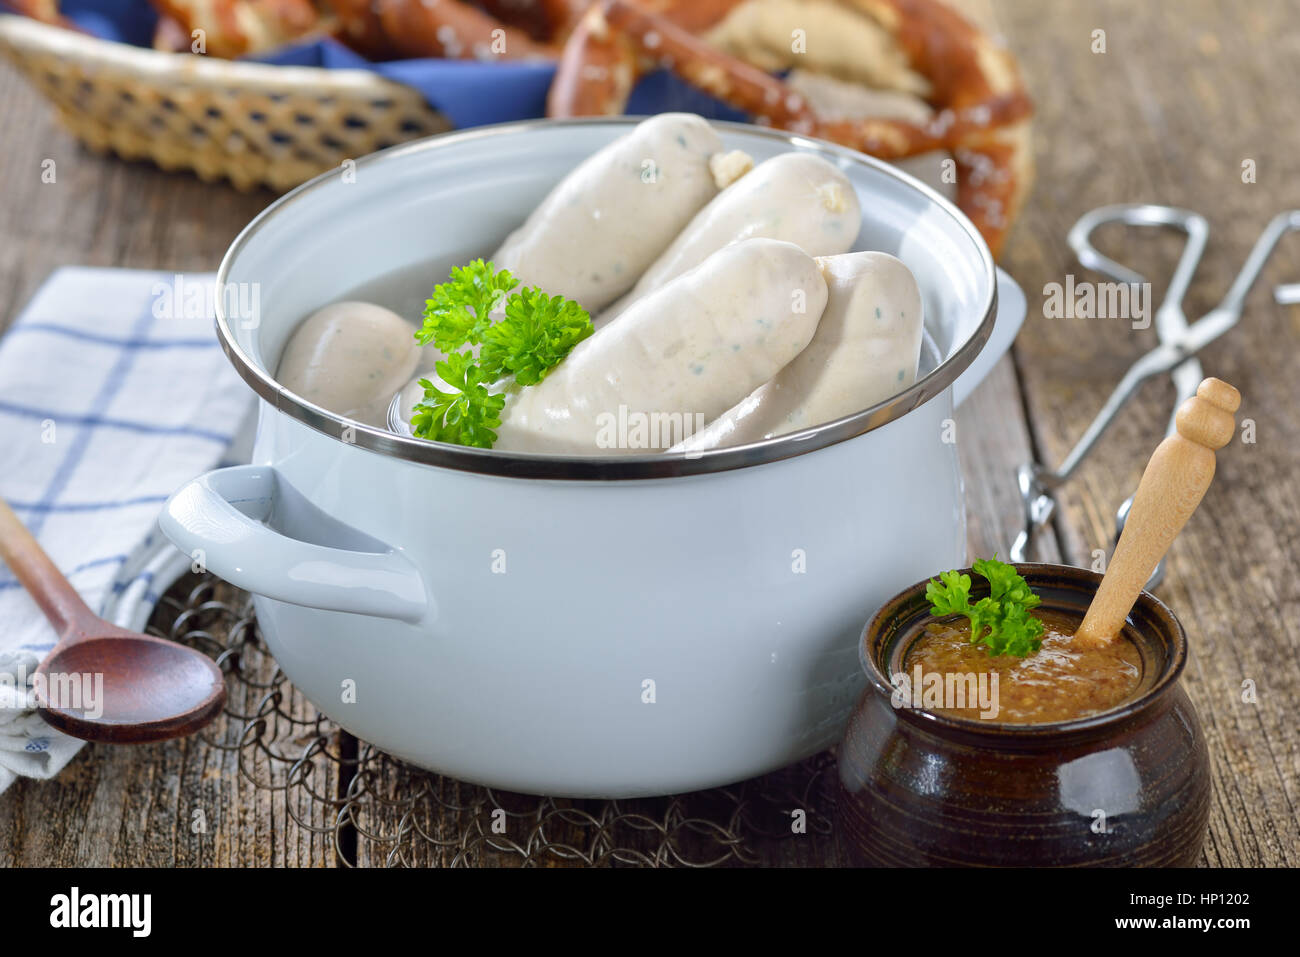 Hot Bavarian white sausages in an enamel cooking pot served on a wooden table with fresh pretzels and sweet mustard Stock Photo